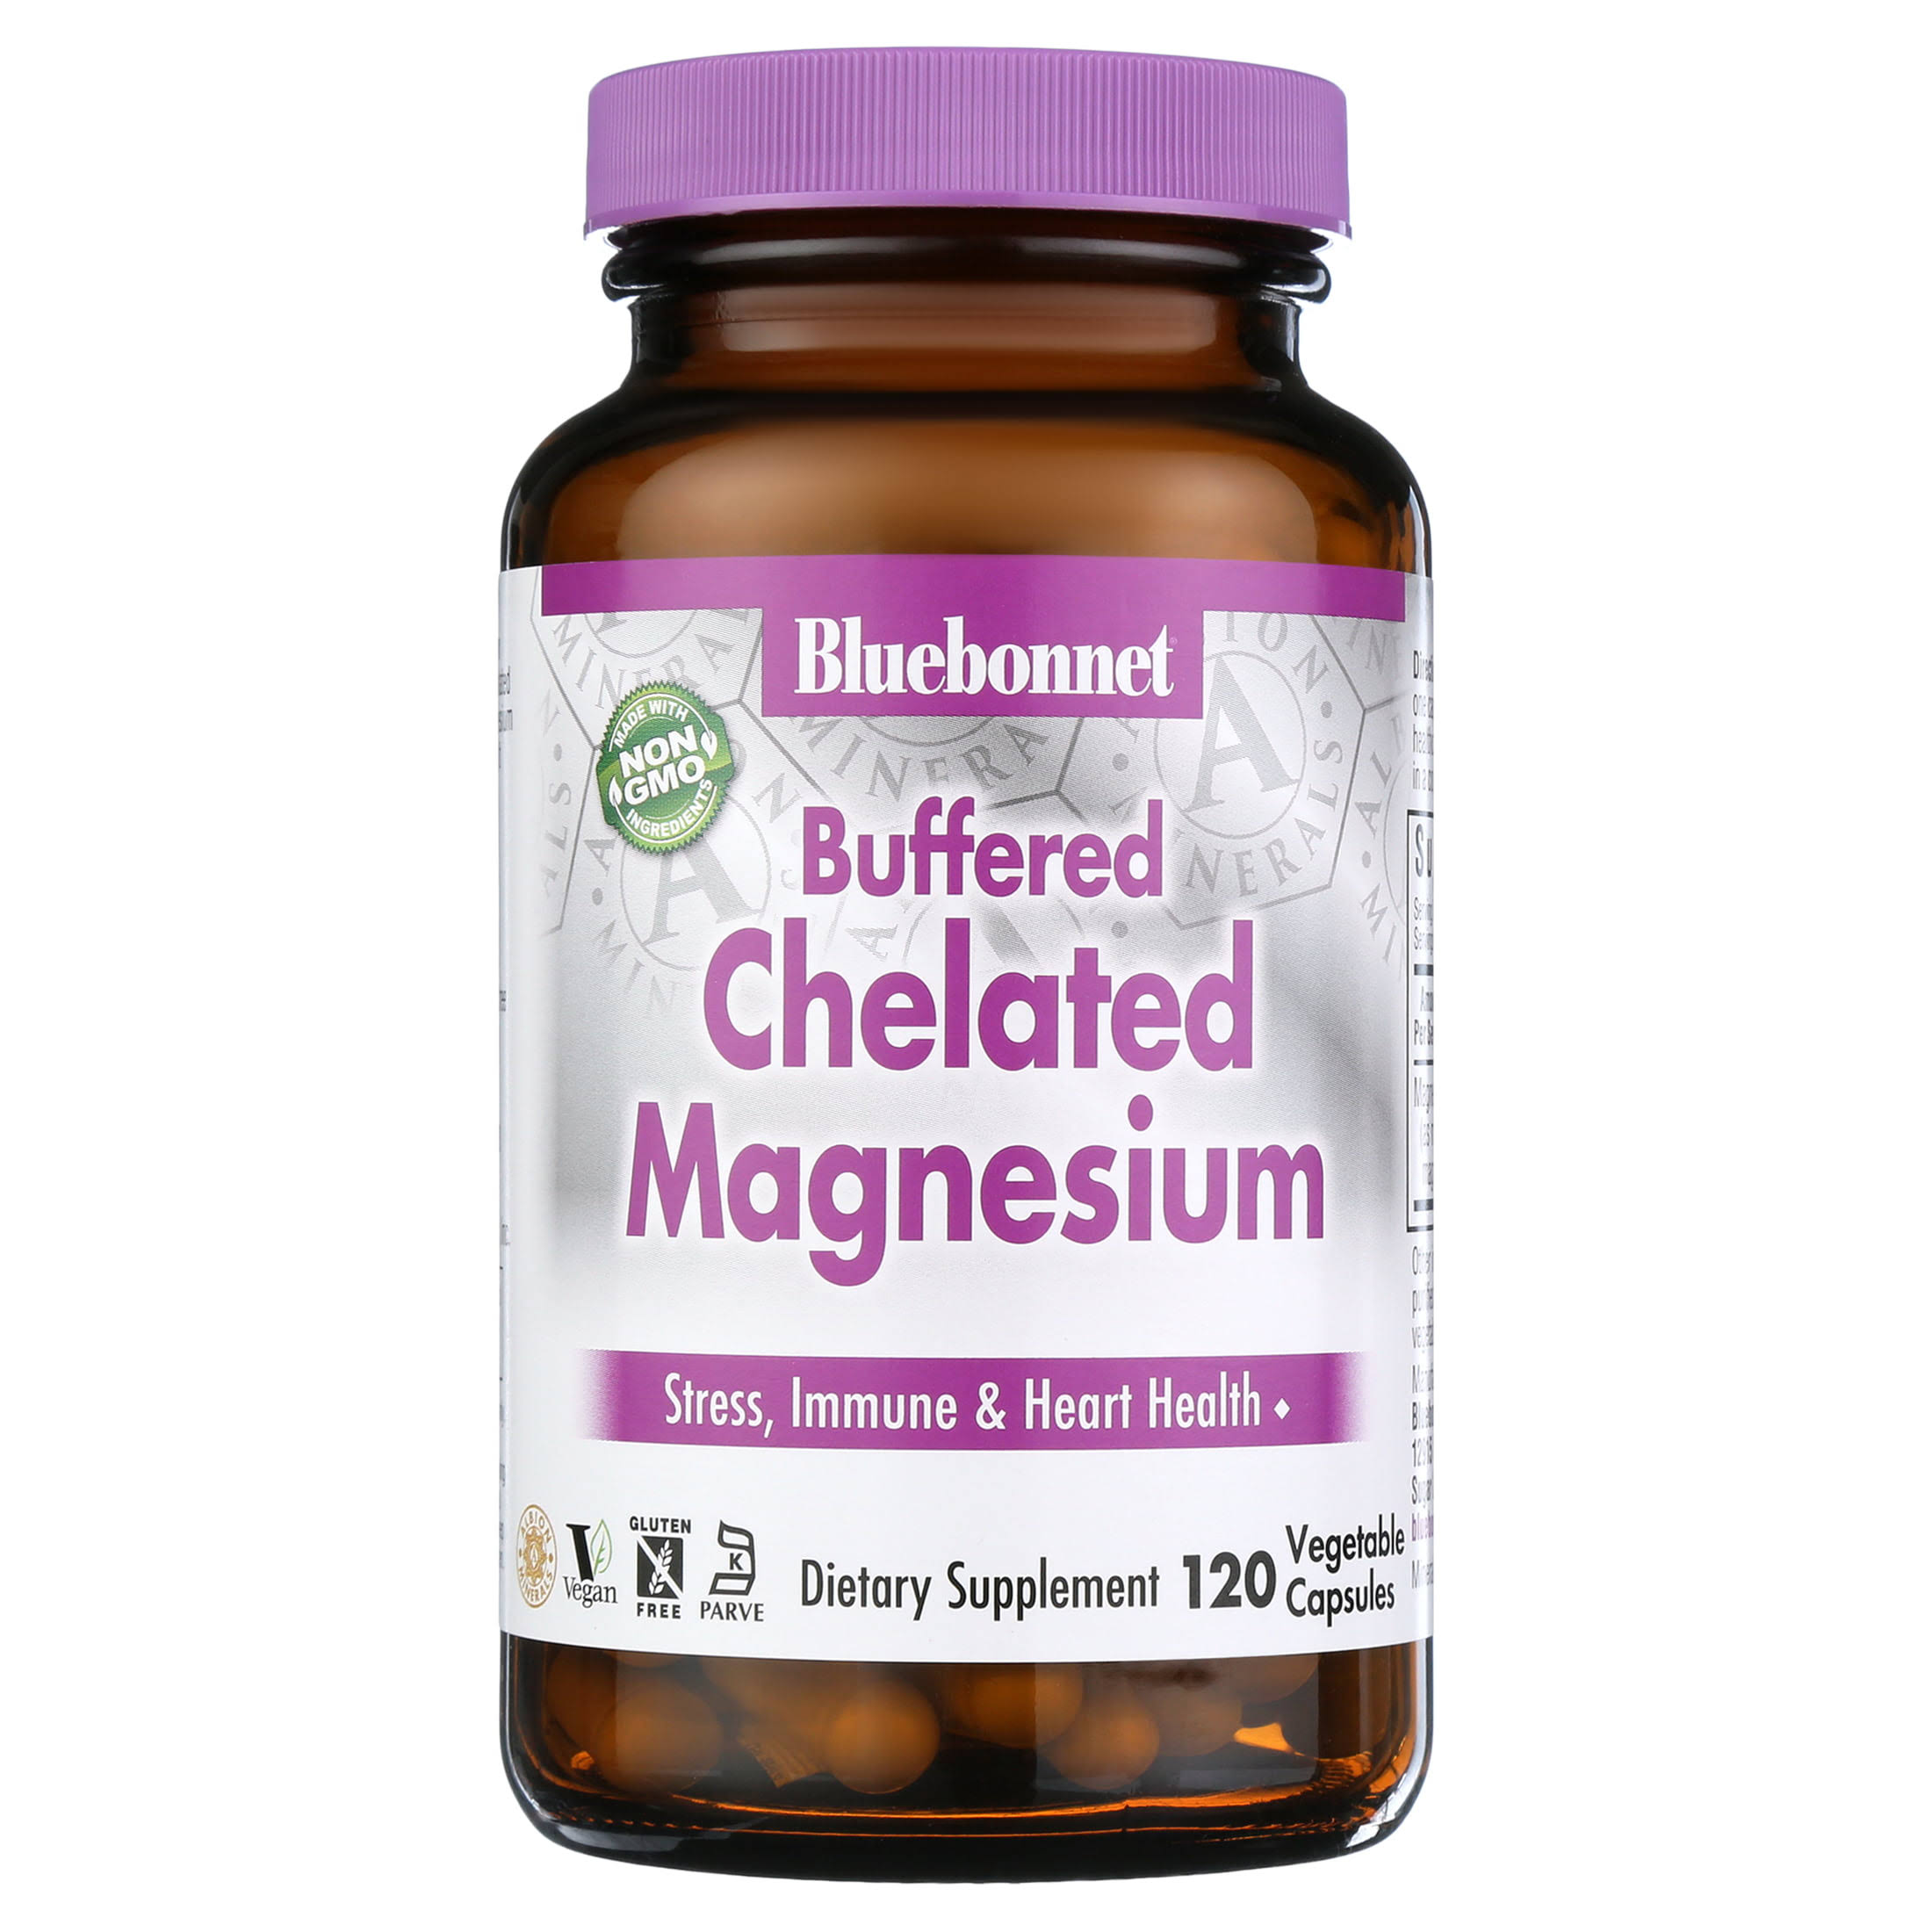 Bluebonnet Albion Buffered Chelated Magnesium 120 Capsules